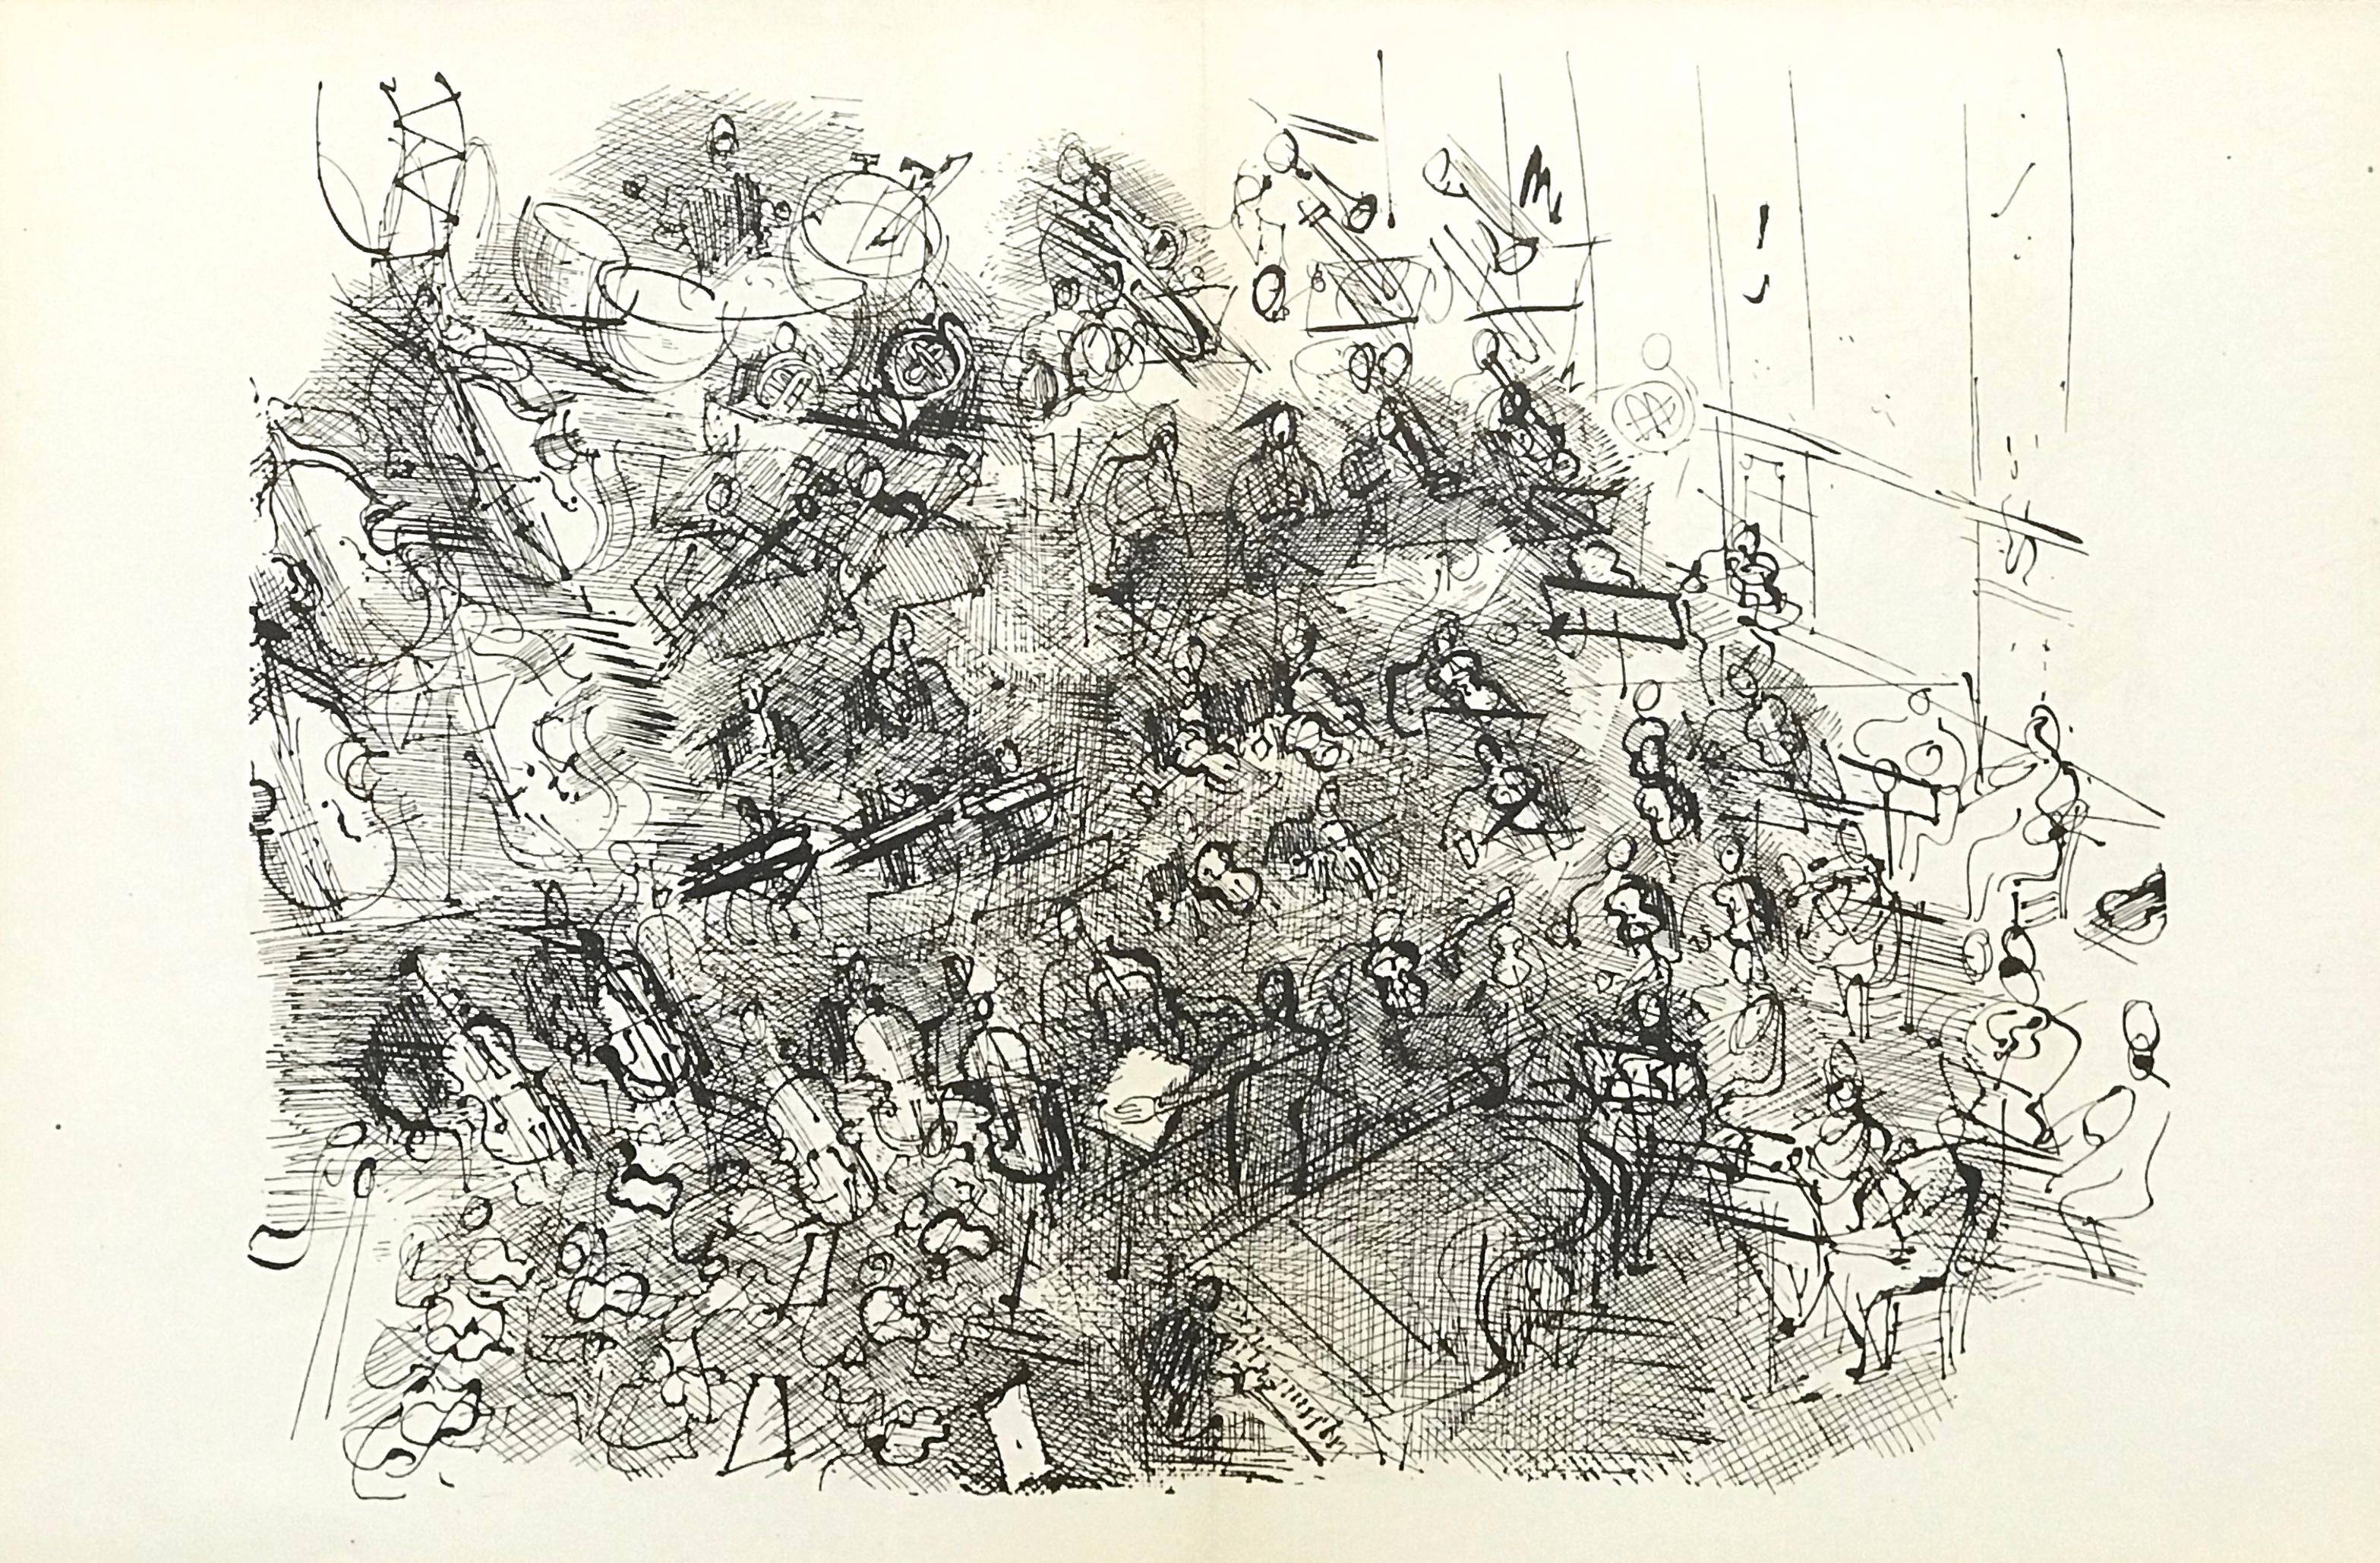 "Une Symphonie" lithograph - Print by (after) Raoul Dufy